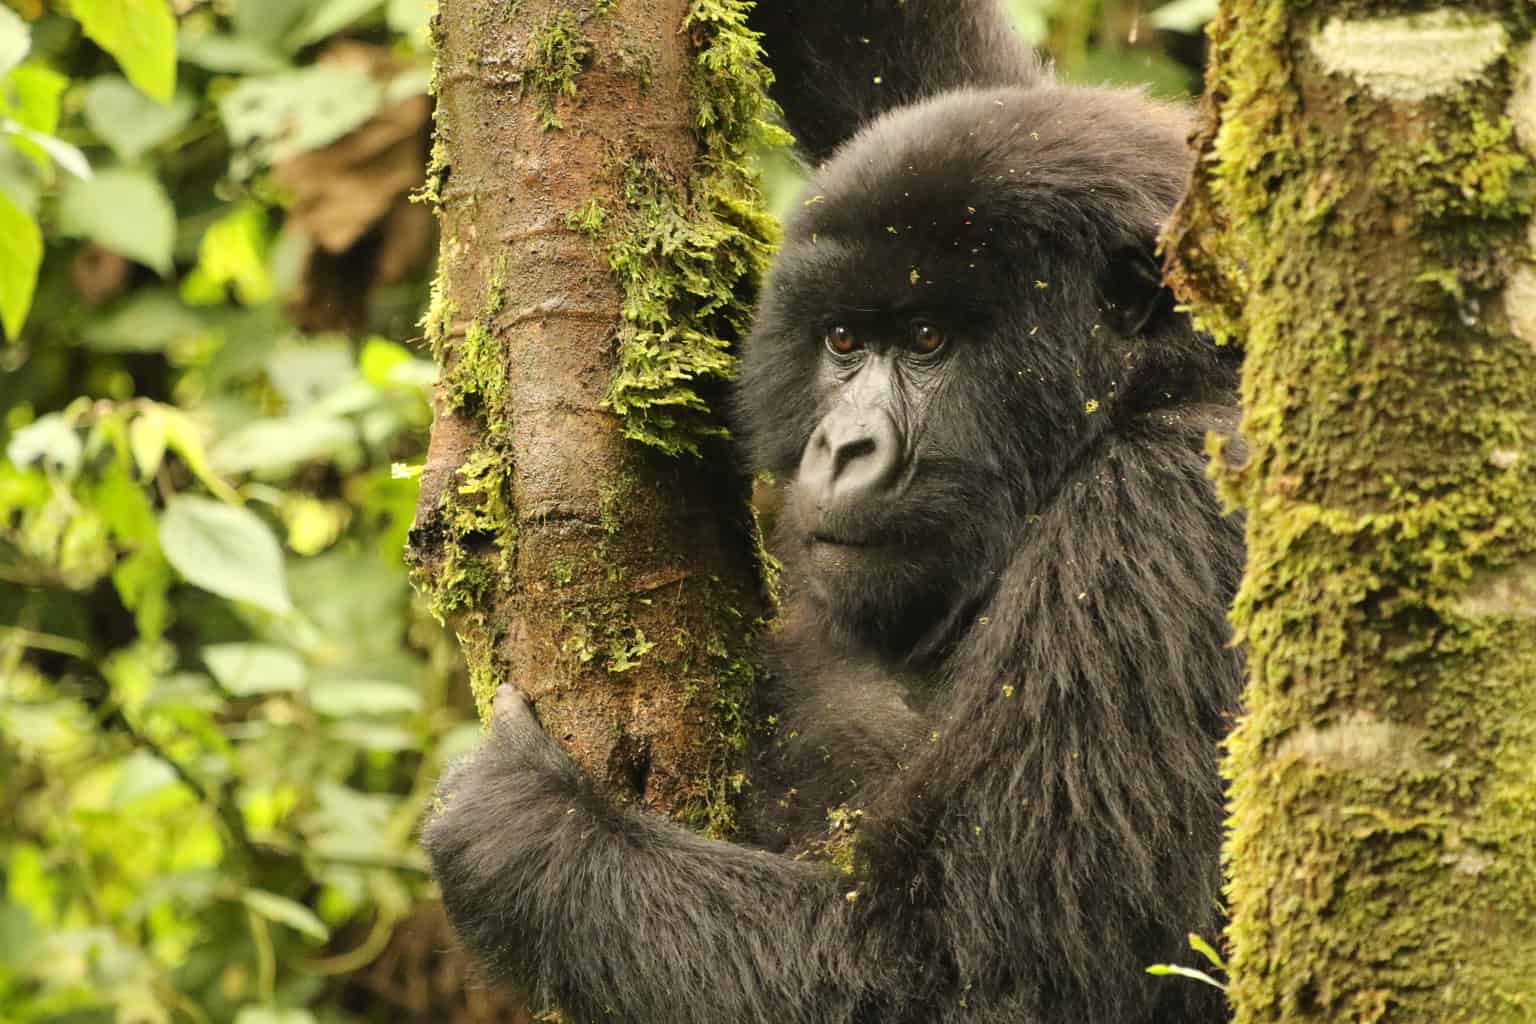 What You Need to Know to Trek to See Gorillas in Rwanda